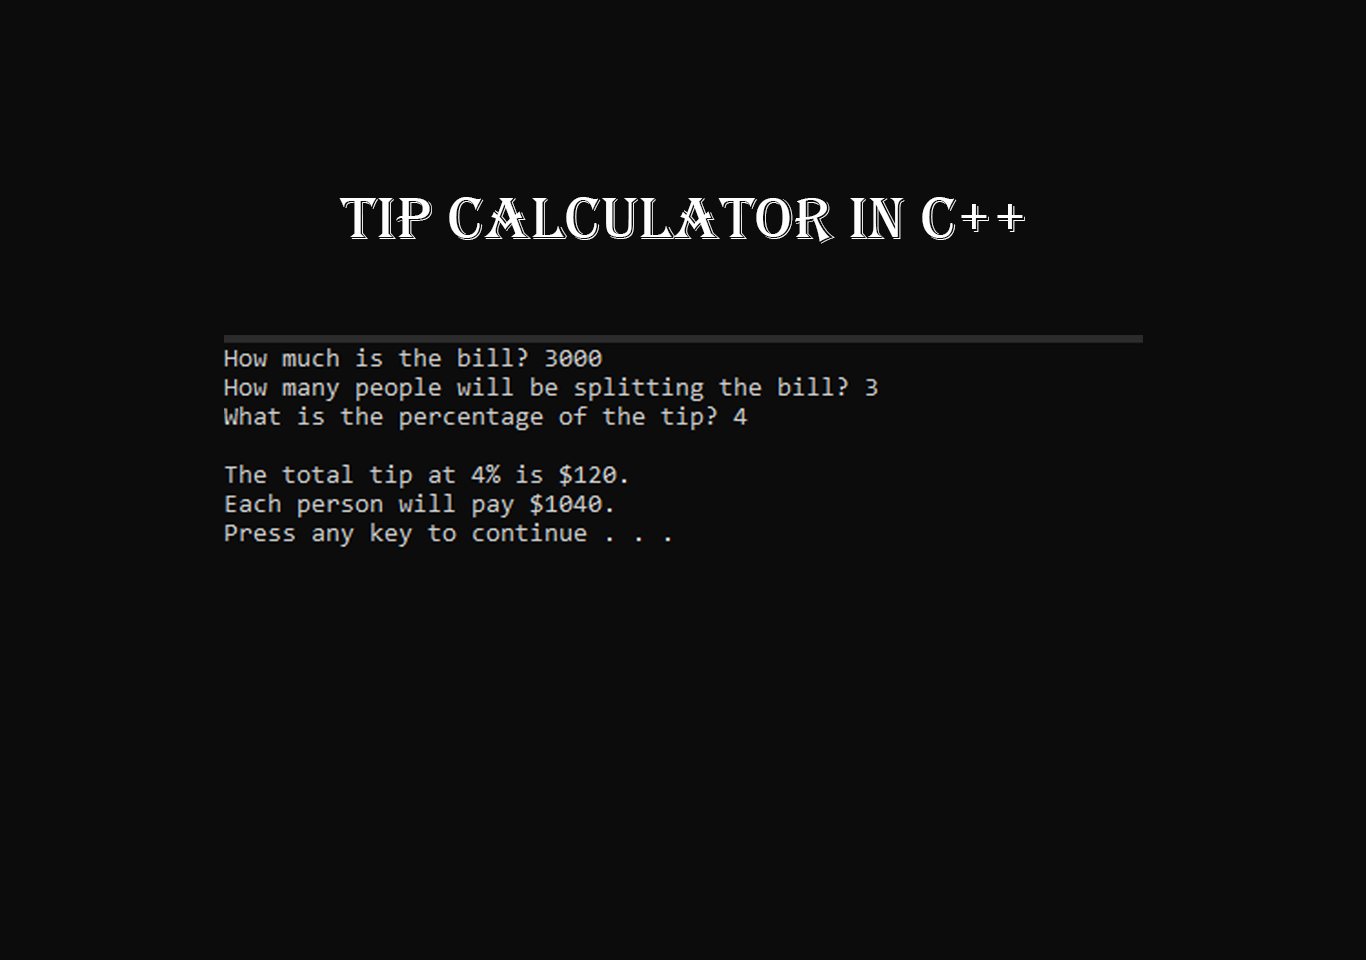 Tip calc in C++ with source code